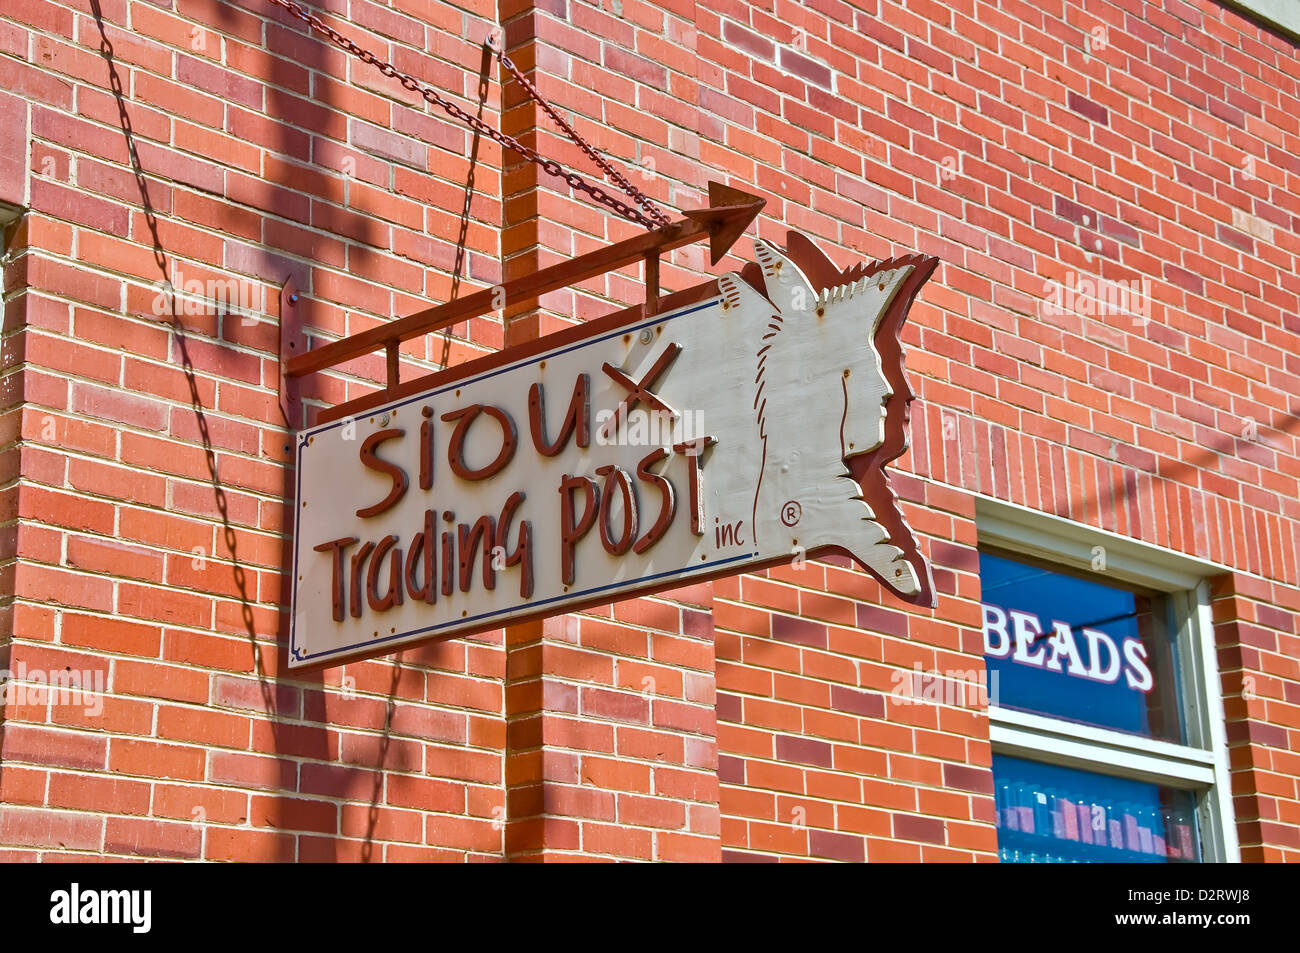 Sioux Trading Post sign on outside of brick souvenir building in Rapid City Stock Photo